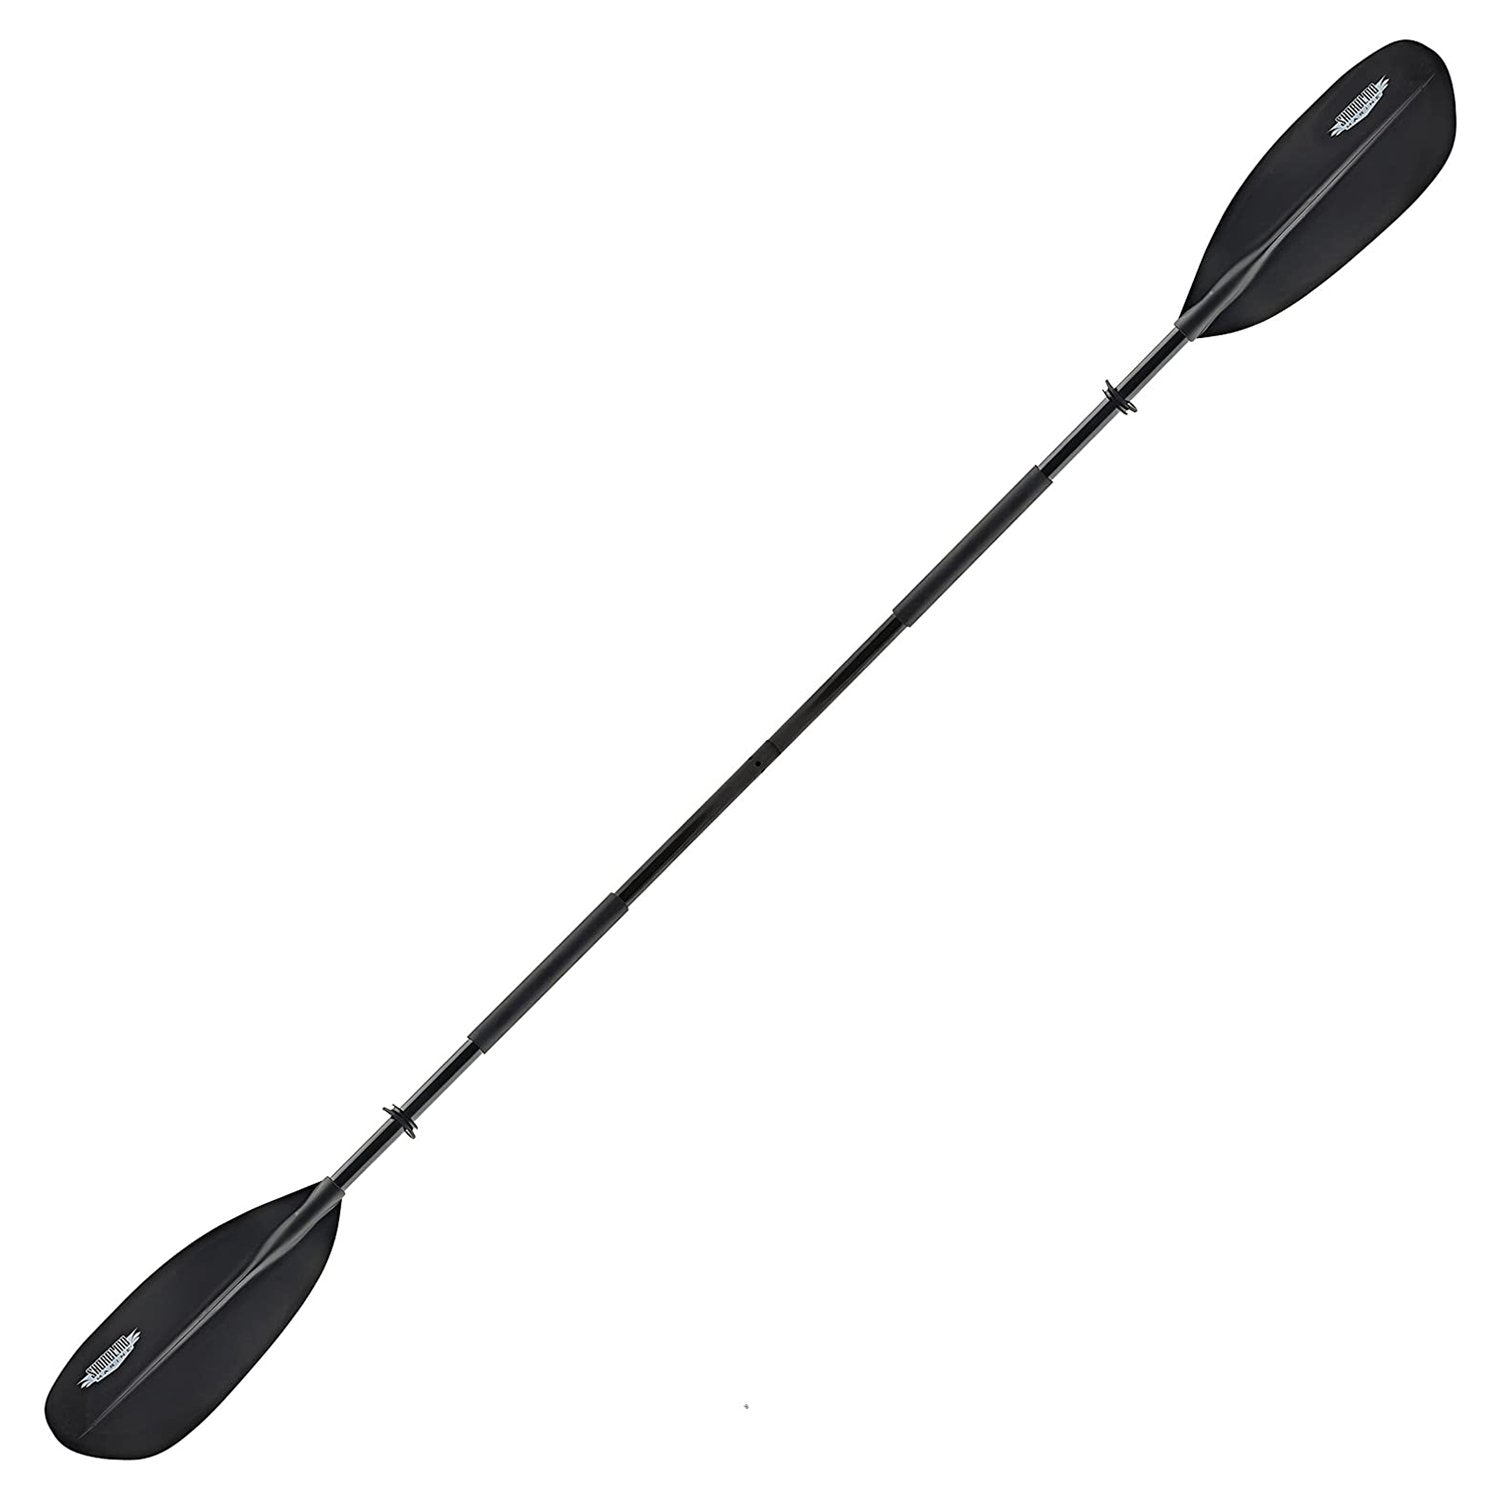 Kayak Paddle Rounded Blade - 96 in / 243.8 cm